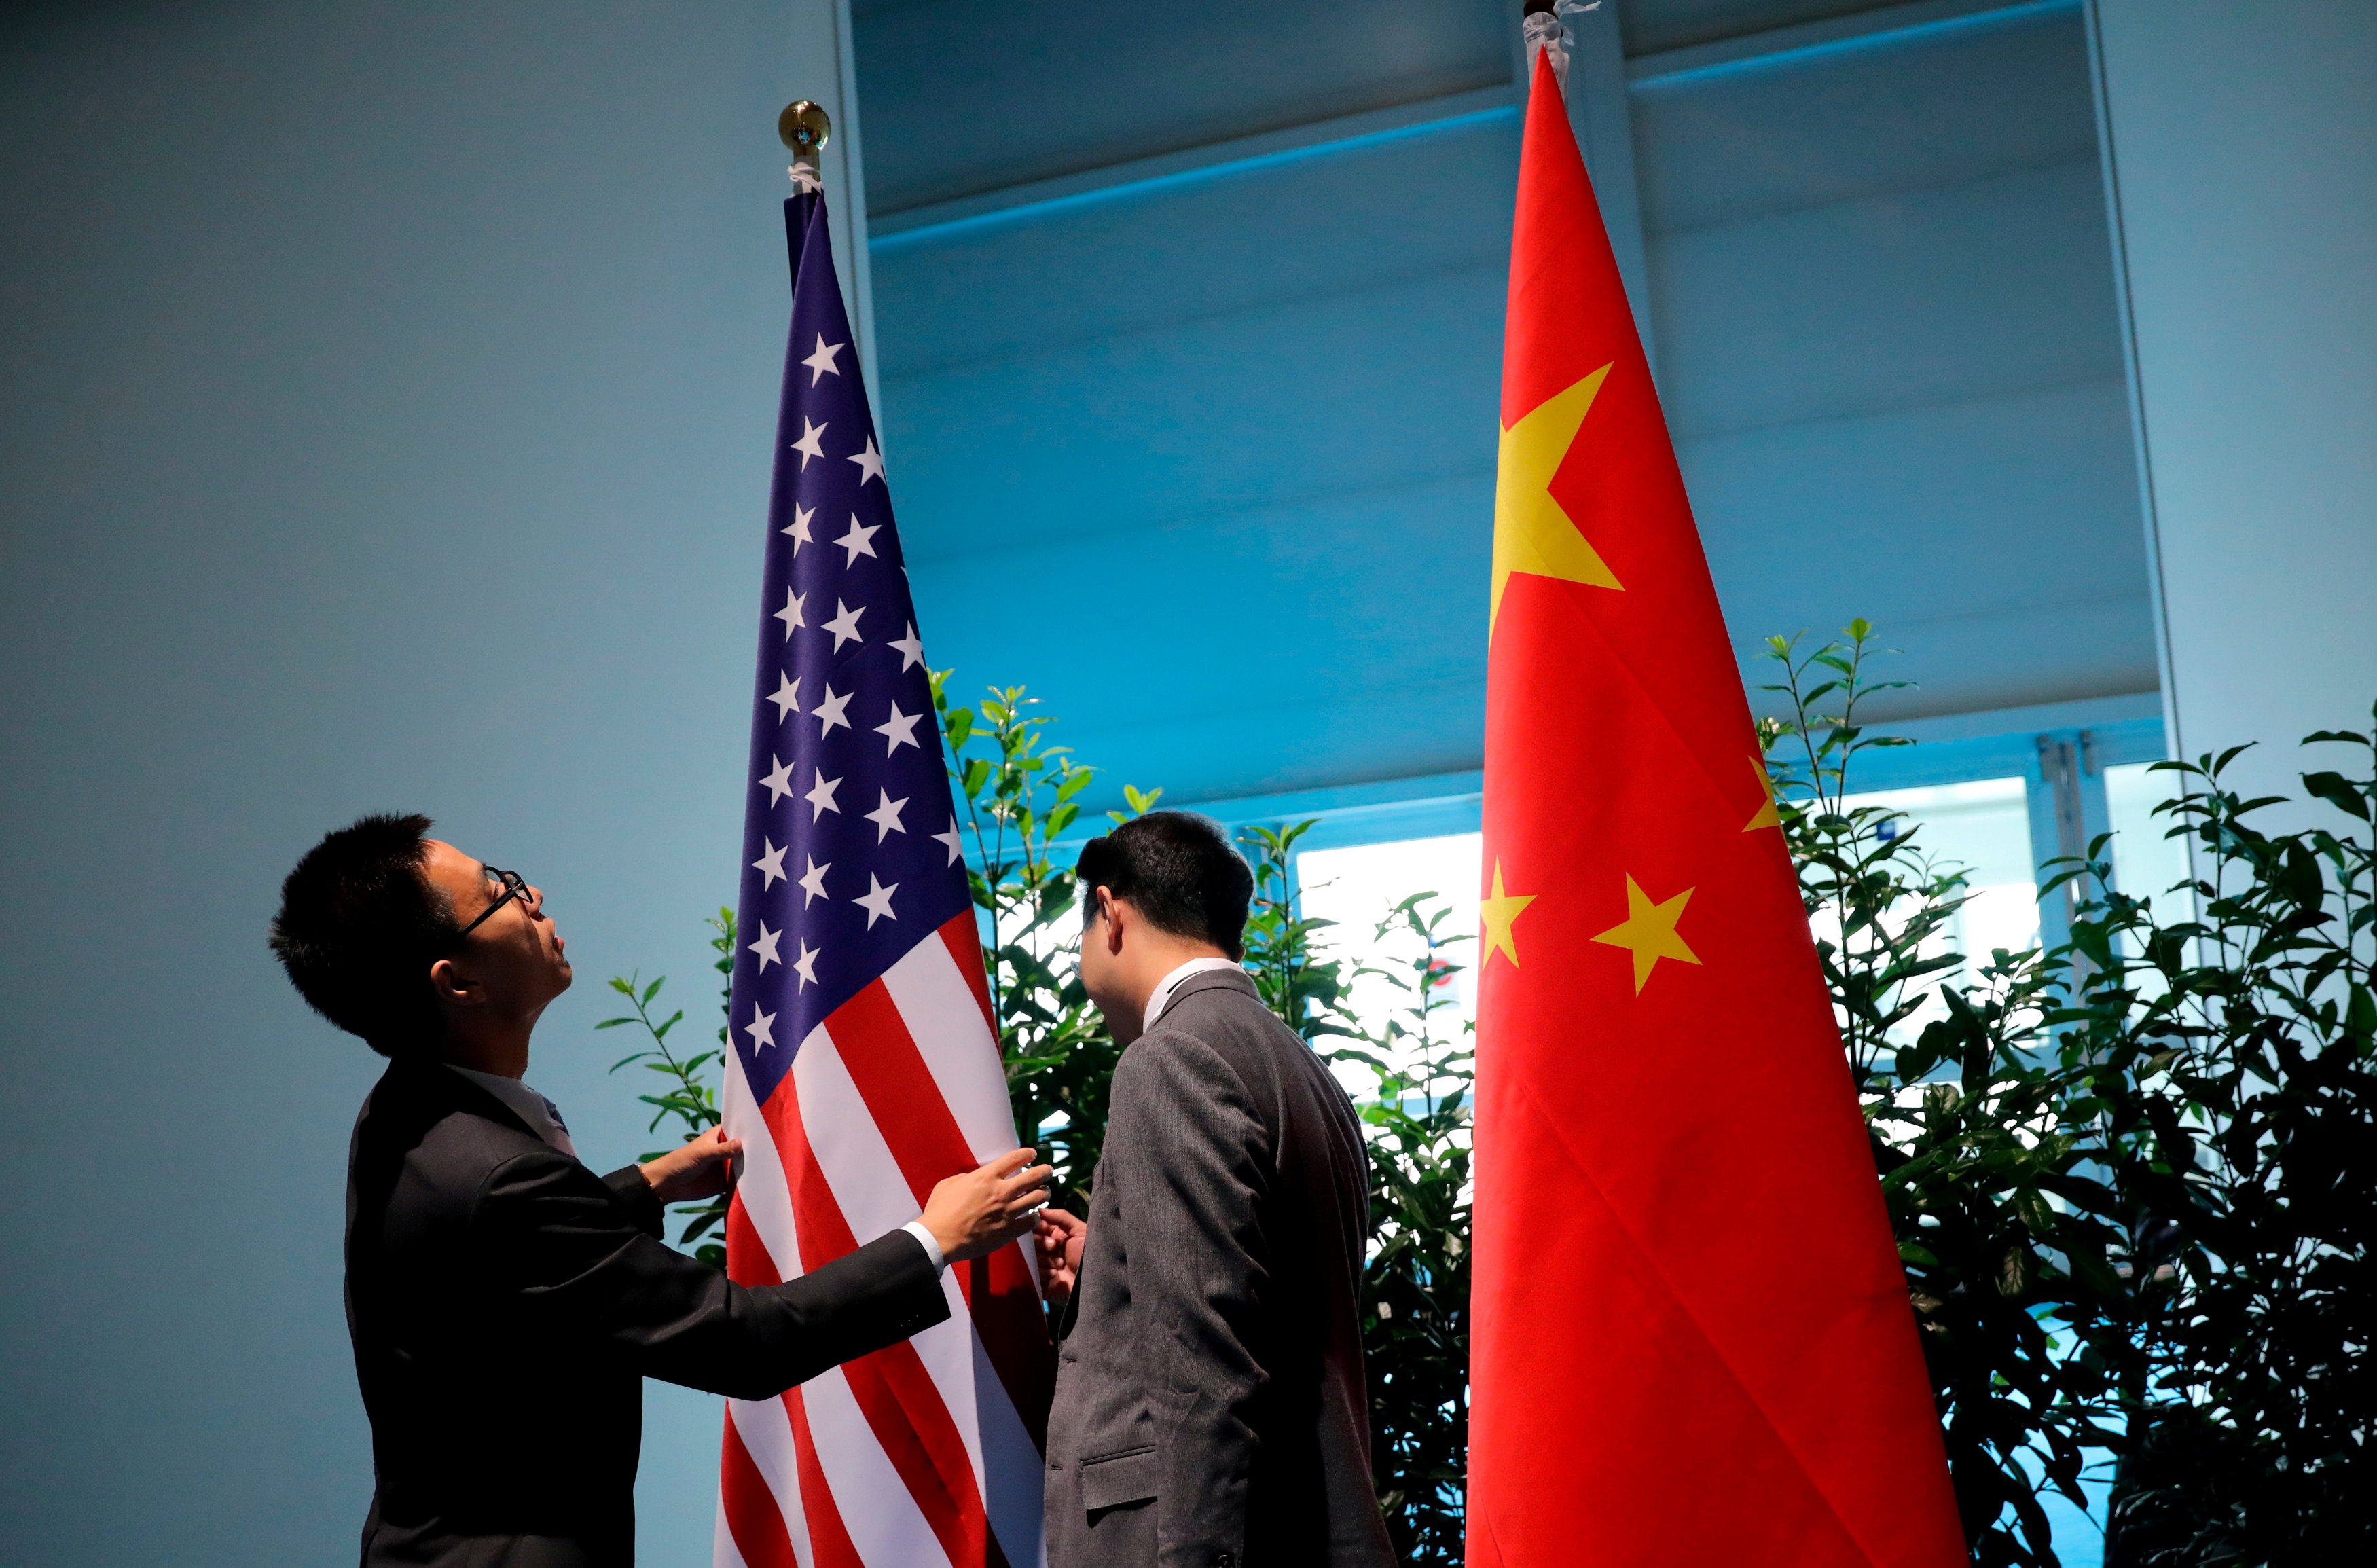 Observers warn that an aggressive stance on China might isolate Washington, diminishing its strategic options. Photo: Reuters